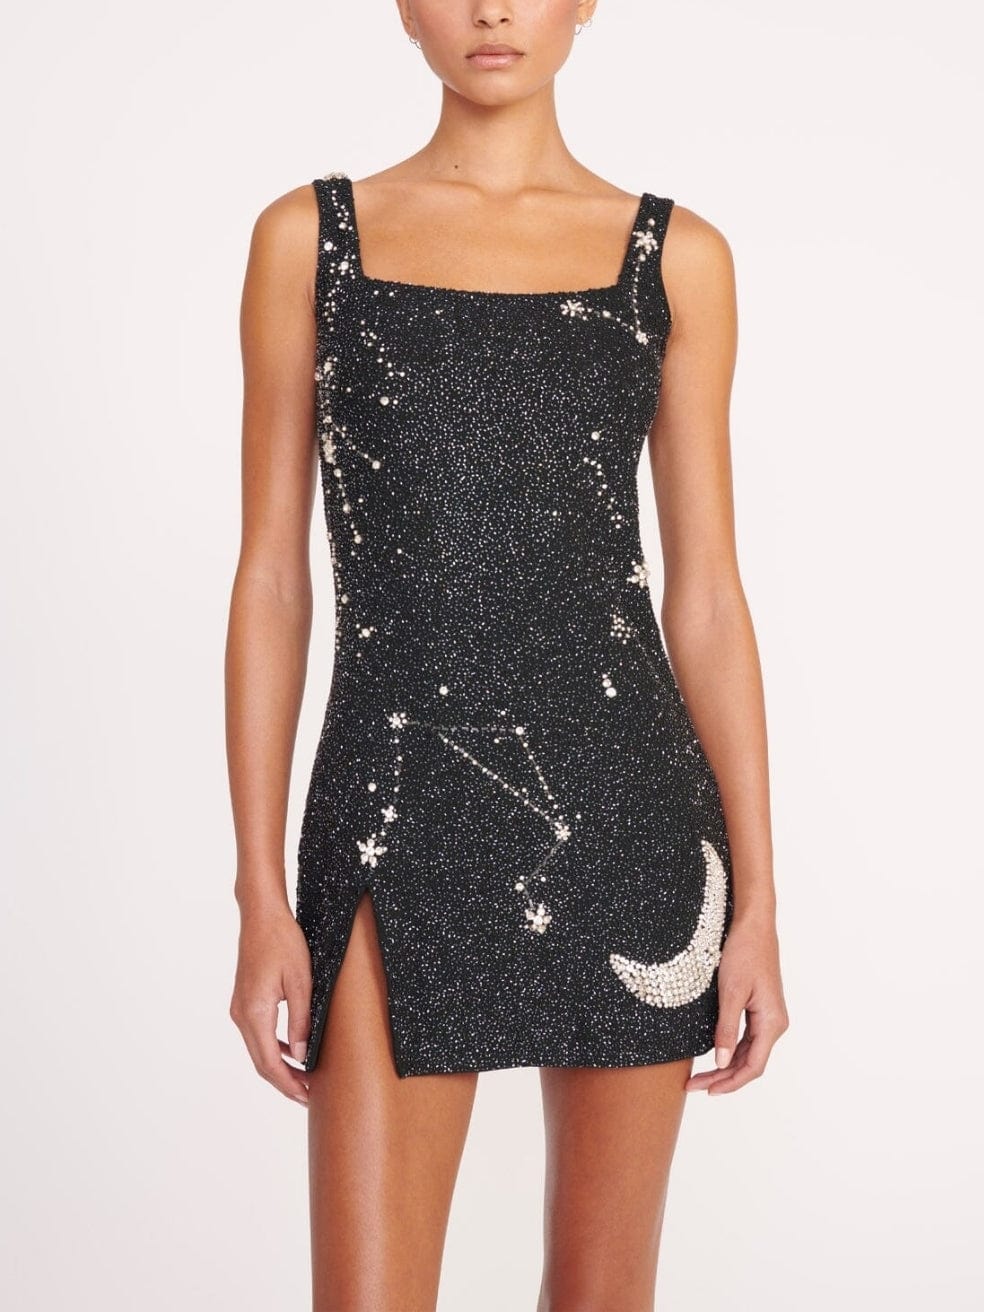 Le Sable Dress in Starry Night